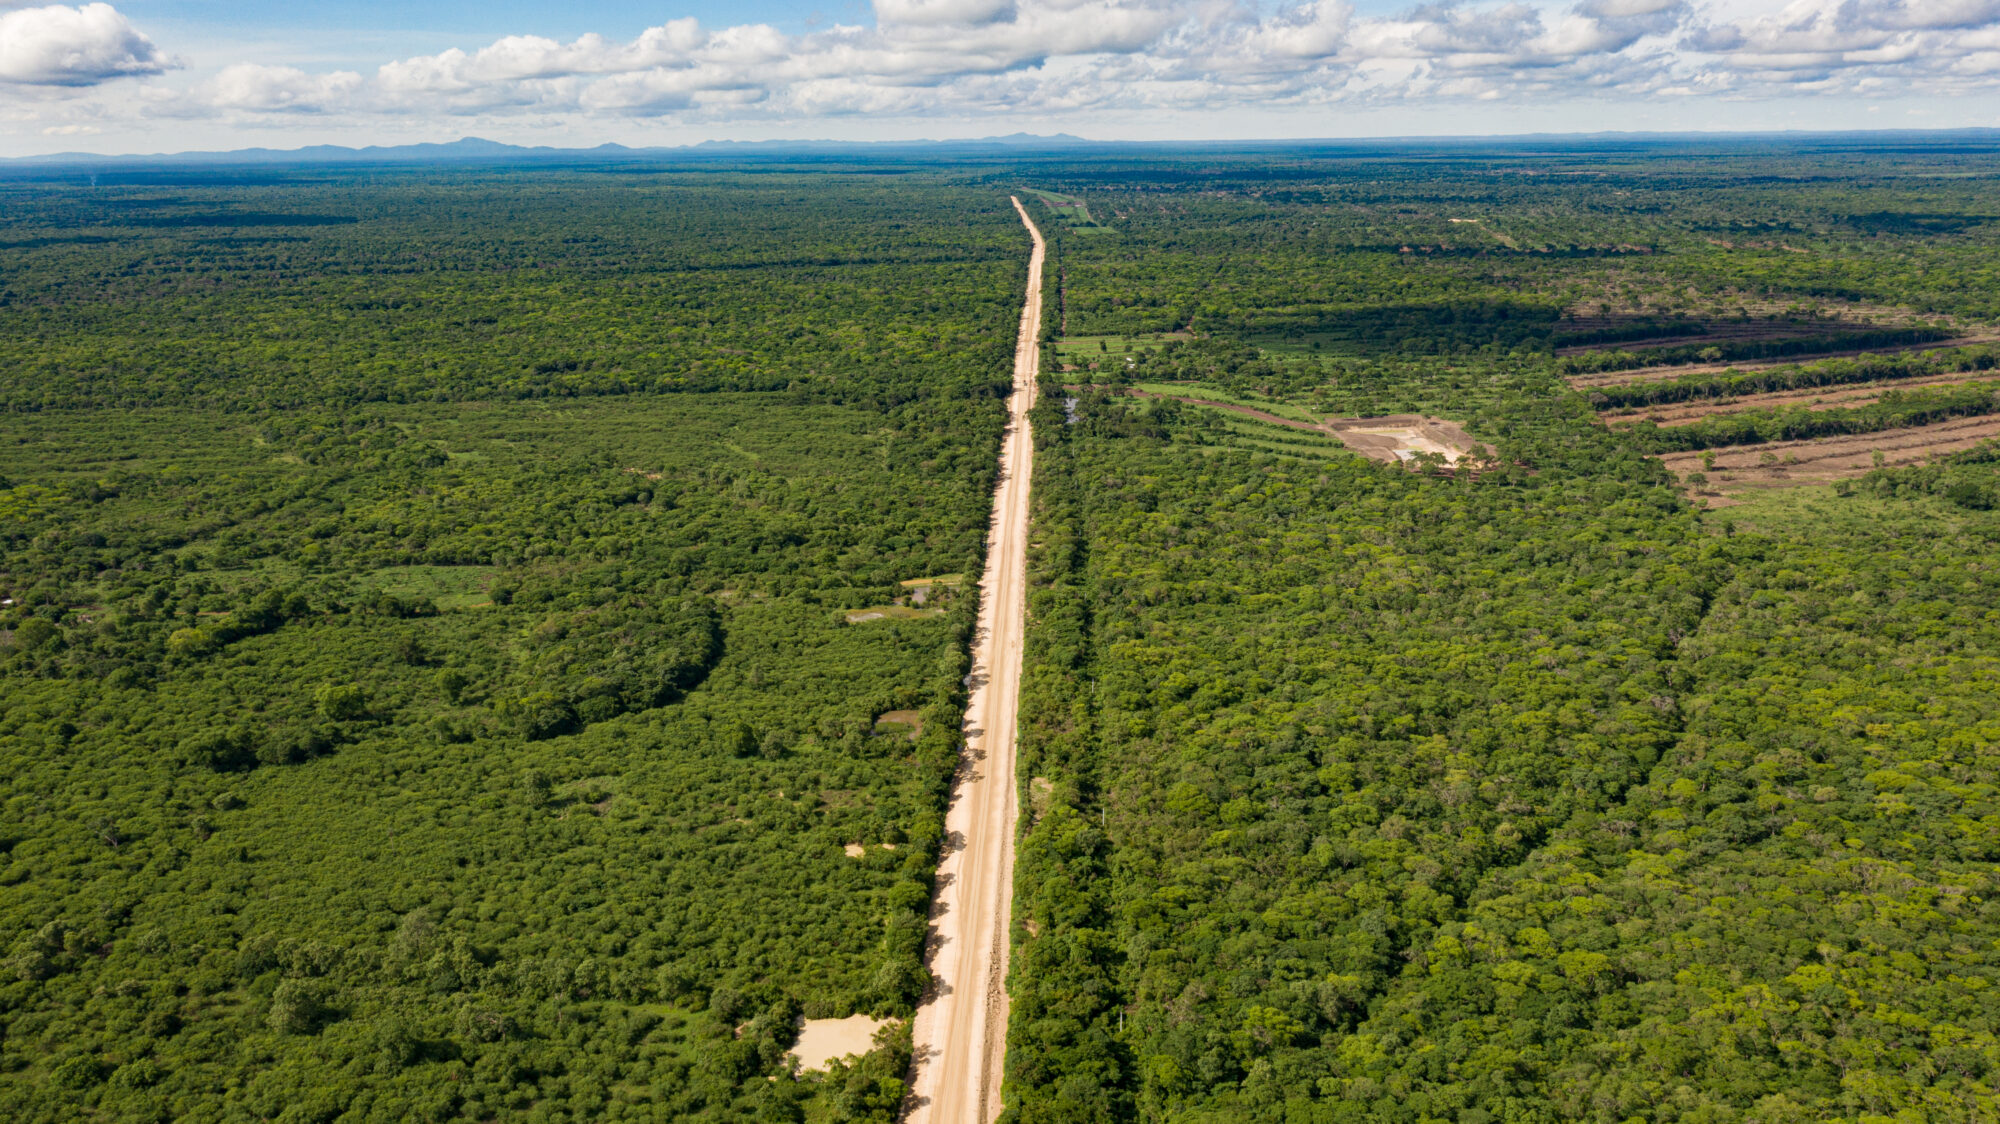 <p>Construction progresses on the San José–San Ignacio road in Bolivia, which crosses the Chiquitano dry forests, a unique and biodiverse ecosystem. Work to expand a dirt track into an asphalt highway began in 2019, but it has been beset by delays and disagreements. (Image: Ernst Udo Drawert)</p>